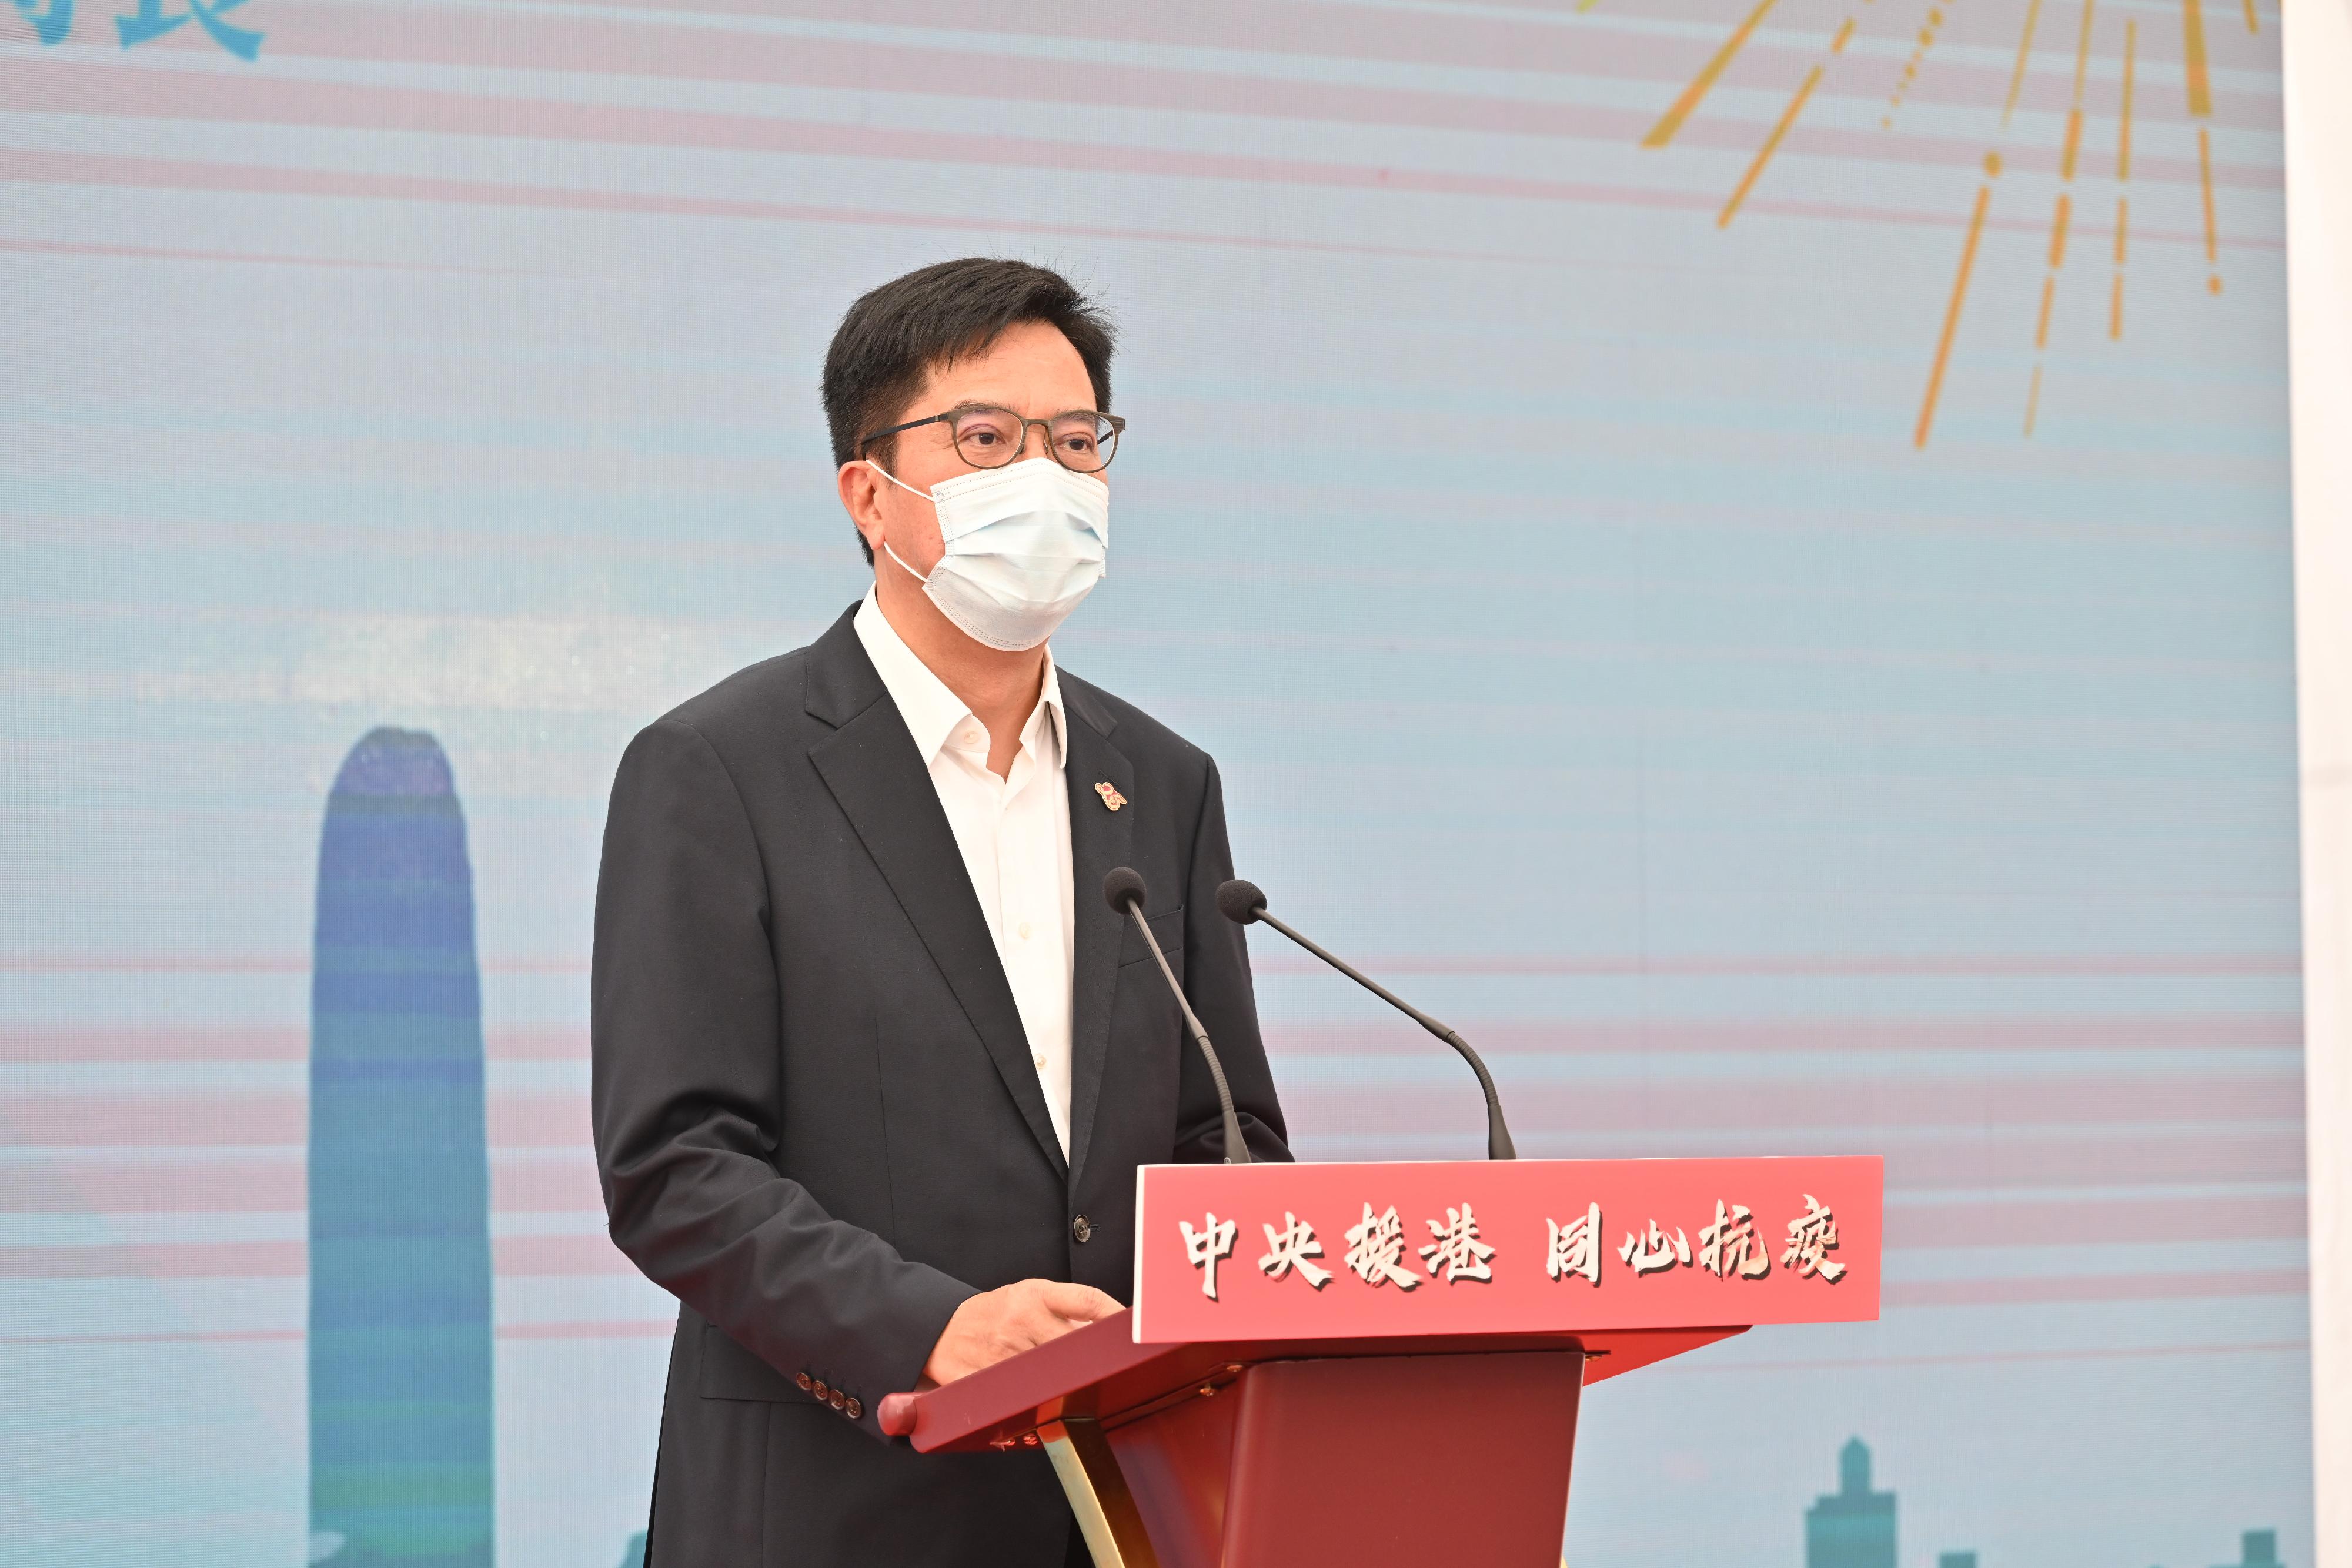 The Secretary for Development, Mr Michael Wong; the Secretary for Food and Health, Professor Sophia Chan; and the Secretary for Security, Mr Tang Ping-keung, this afternoon (June 21) attended the handover ceremony of the Penny's Bay and Kai Tak Community Isolation Facilities constructed with Mainland support. Photo shows Mr Wong delivering a speech.